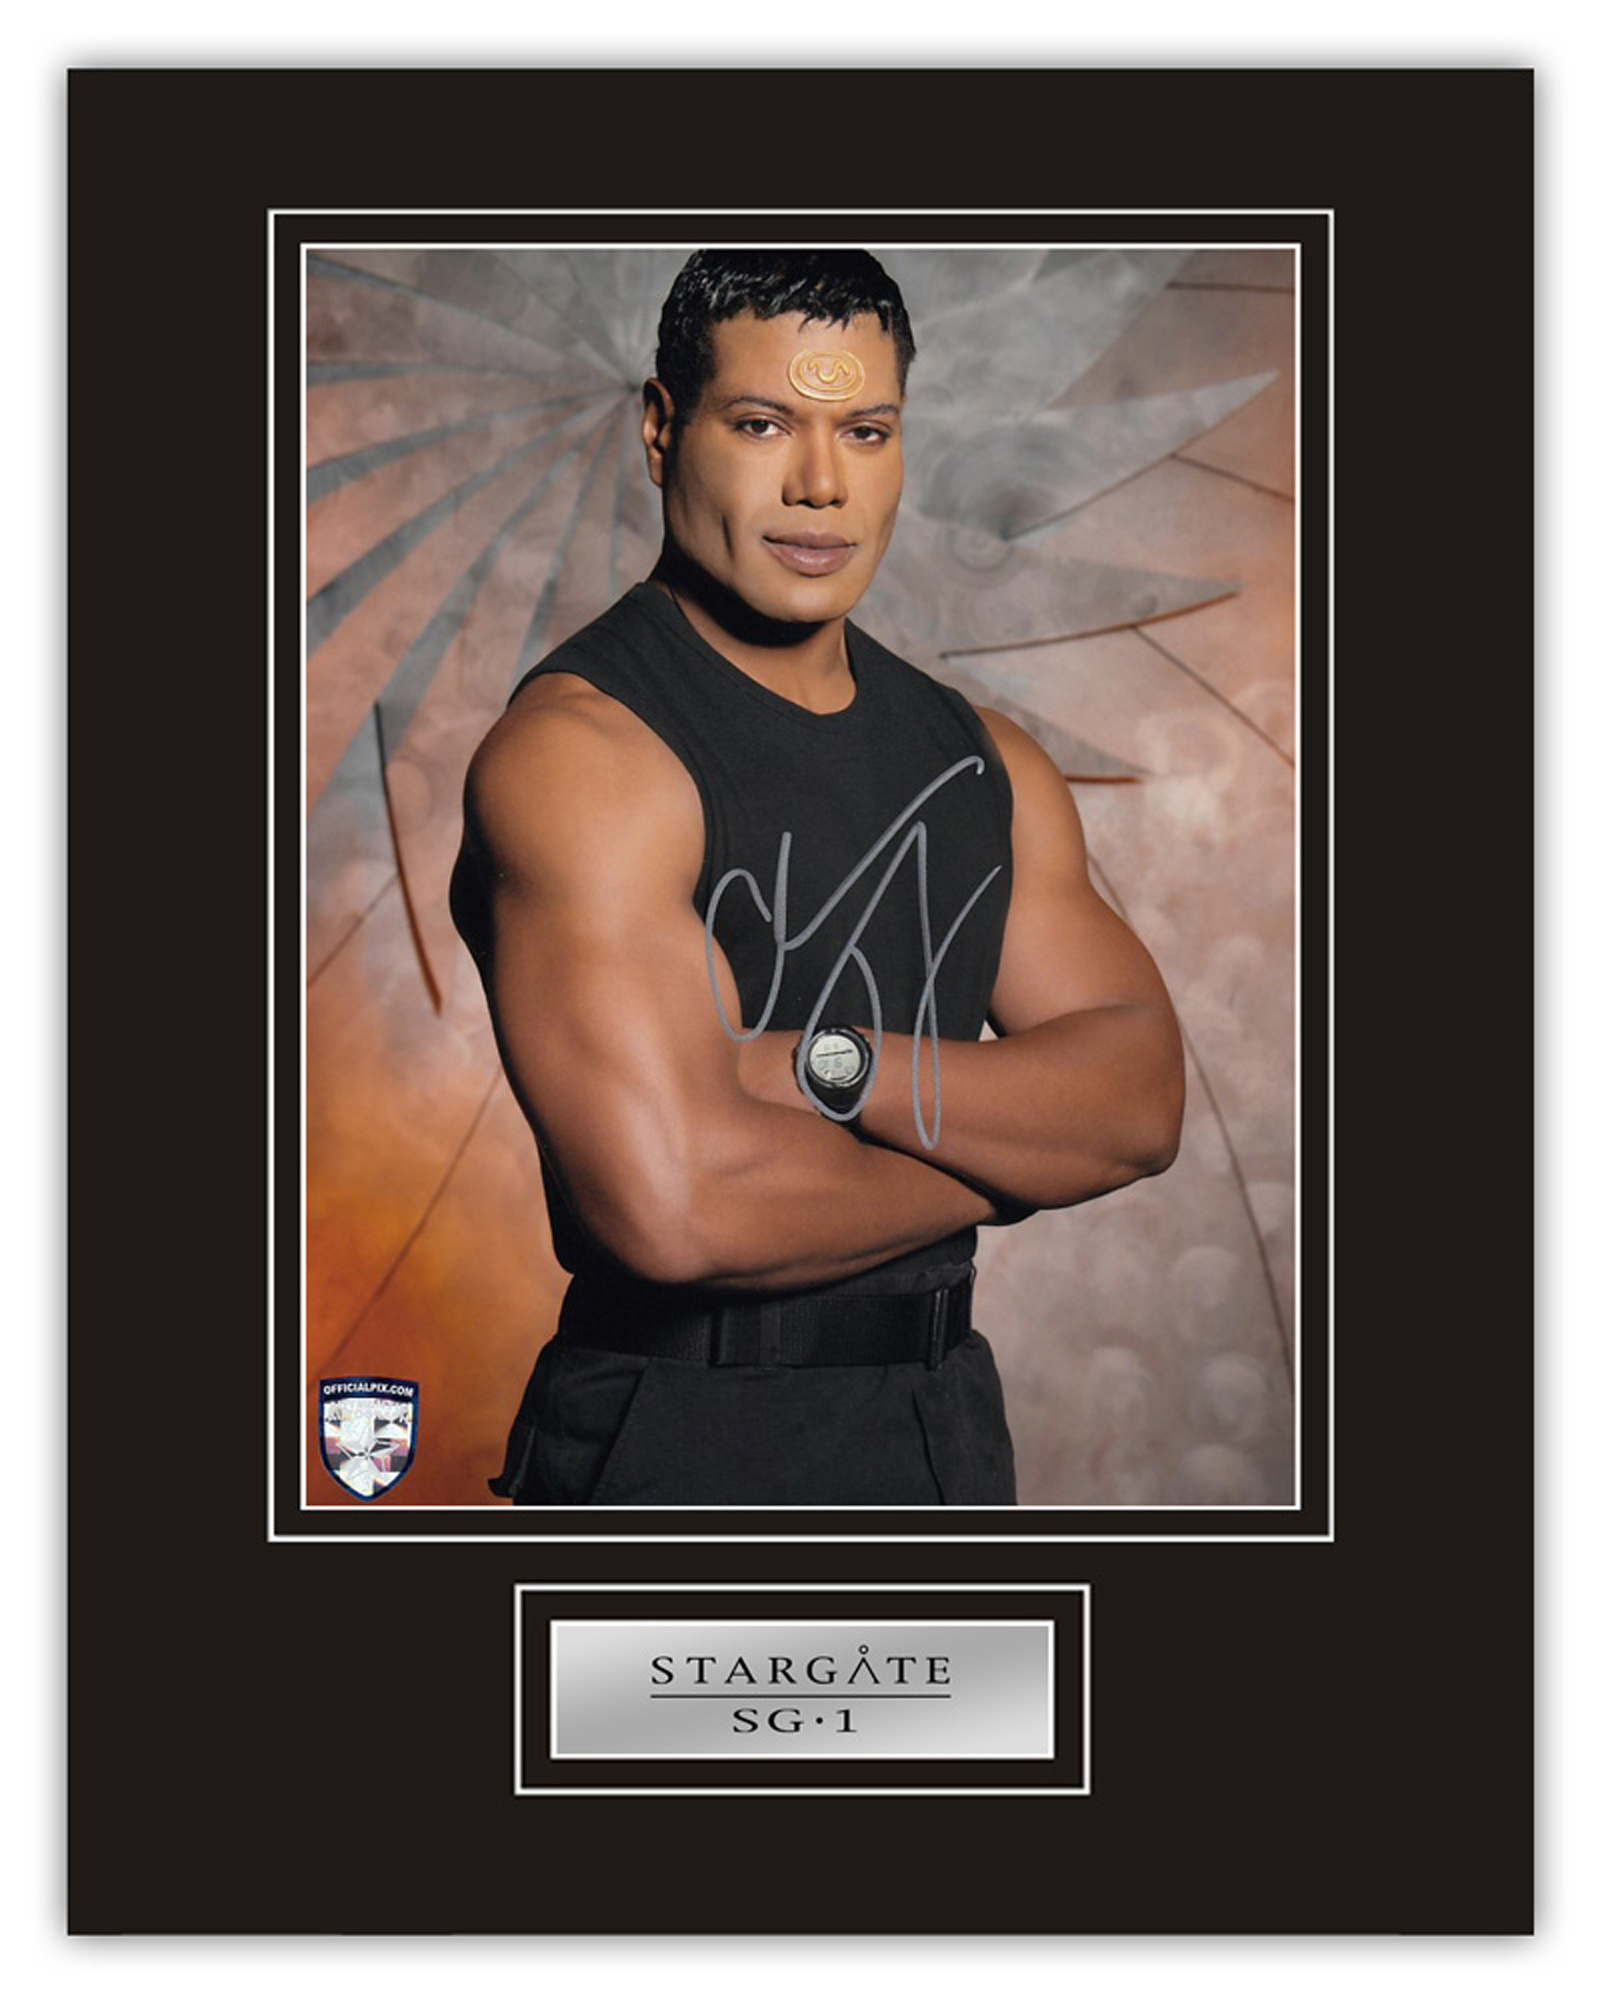 Stunning Display! Stargate SG-1 Chris Judge hand signed professionally mounted display. This